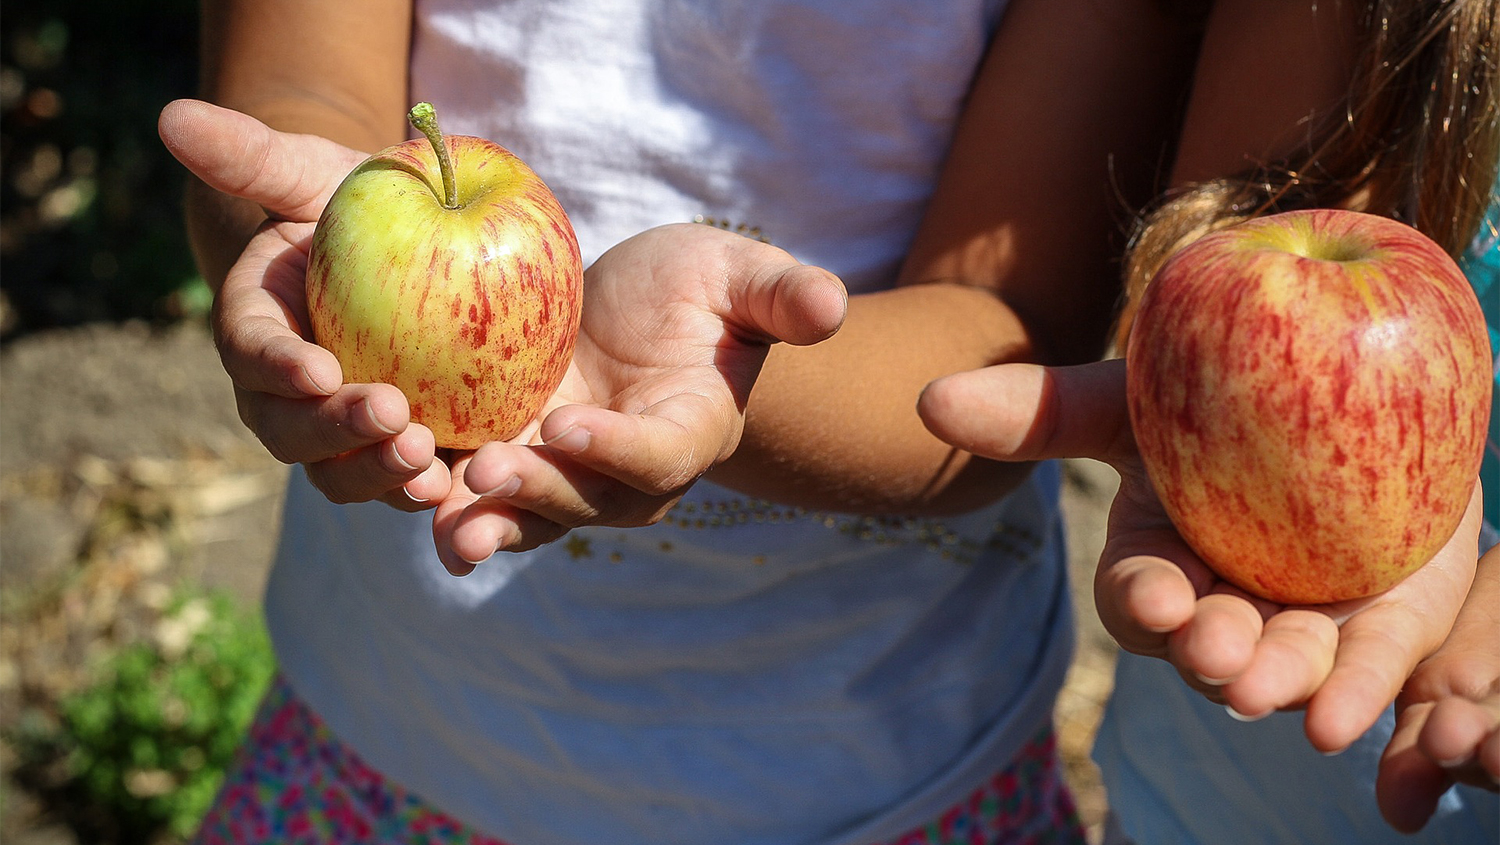 Kids and Apples - Agritourism Experiences Increase Consumers & Pro-Environmental Behaviors - Parks Recreation and Tourism Management NC State